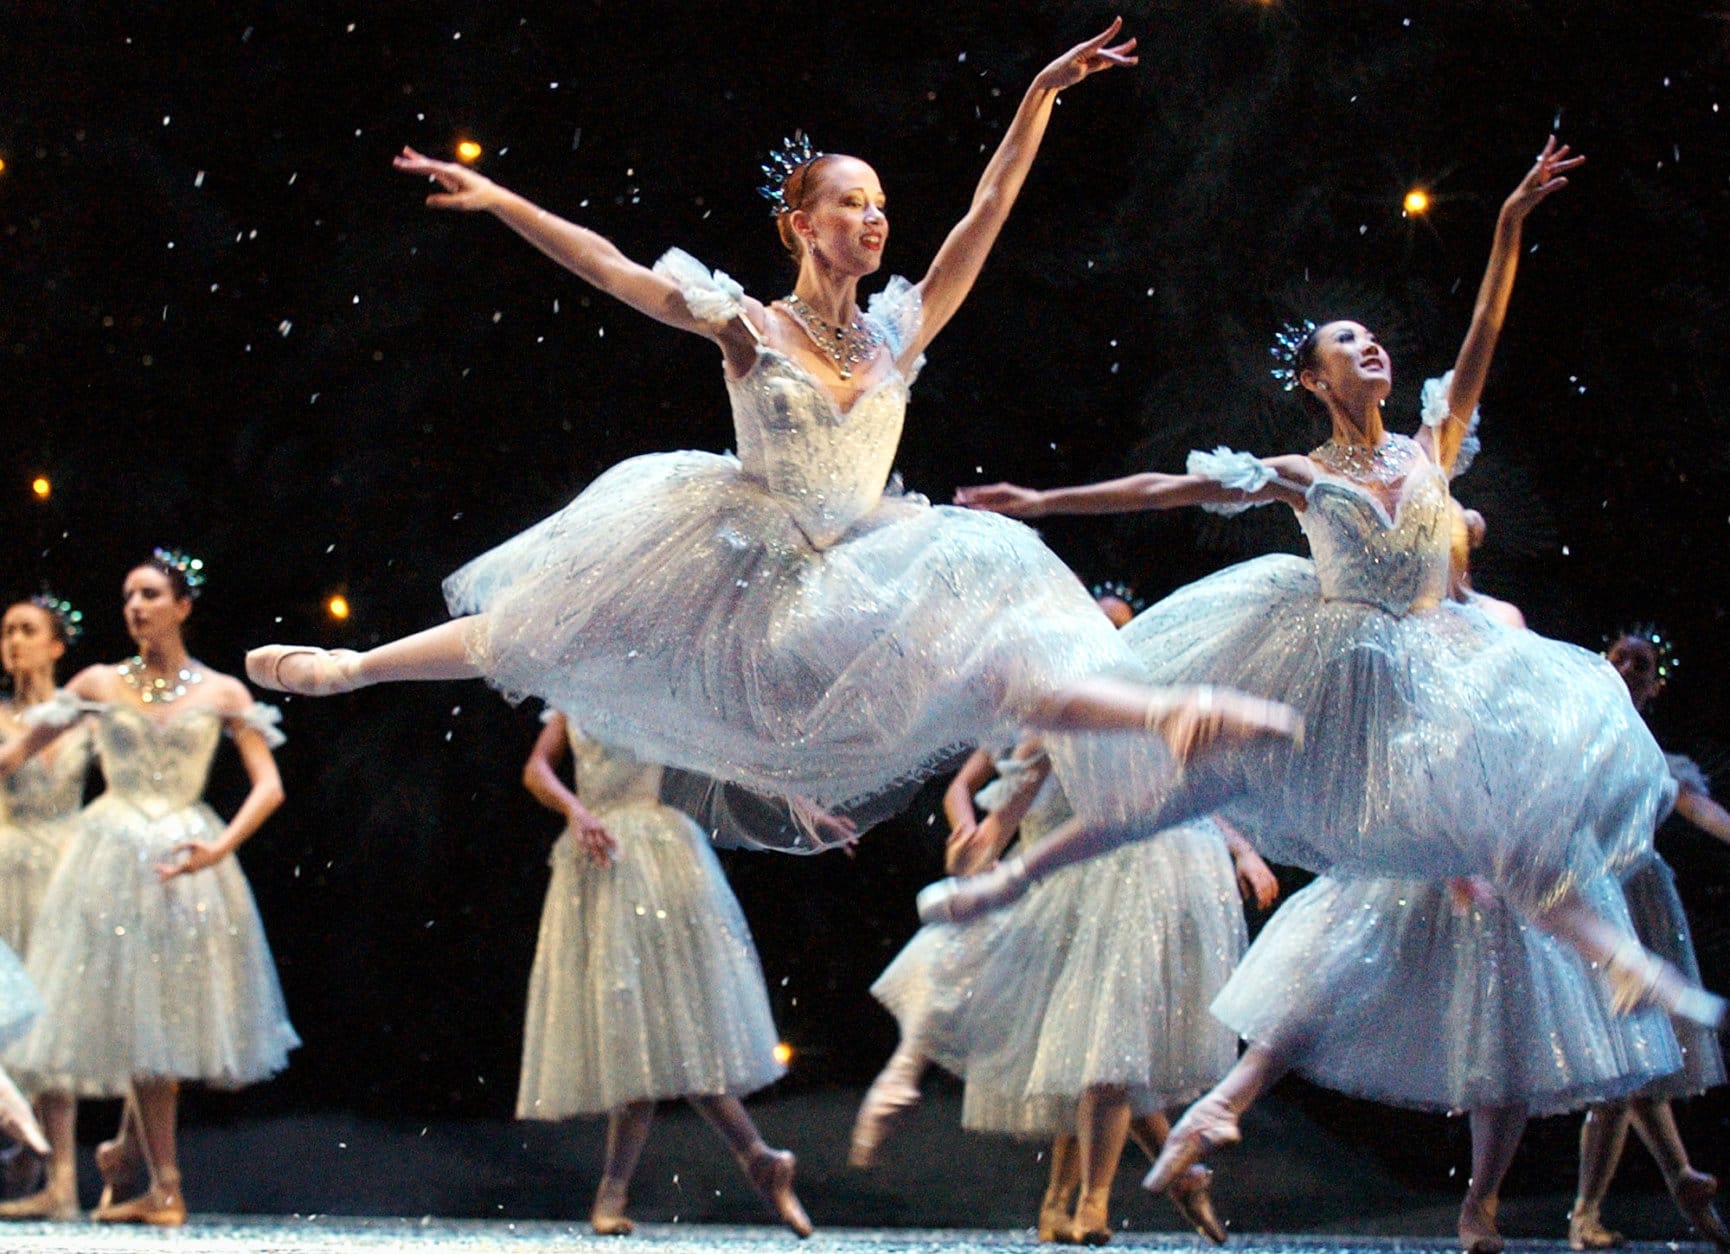 Kristin Ottestad, center, a corps de ballet dancer with the Boston Ballet, performs a leap with other members of the corps during a dress rehearsal of the company's production of The Nutcracker, in Boston, Friday, Nov. 28, 2003. The Nutcracker is to begin Friday evening, Nov. 28, 2003 and run through Tuesday, Dec. 30, 2003. (AP Photo/Steven Senne)